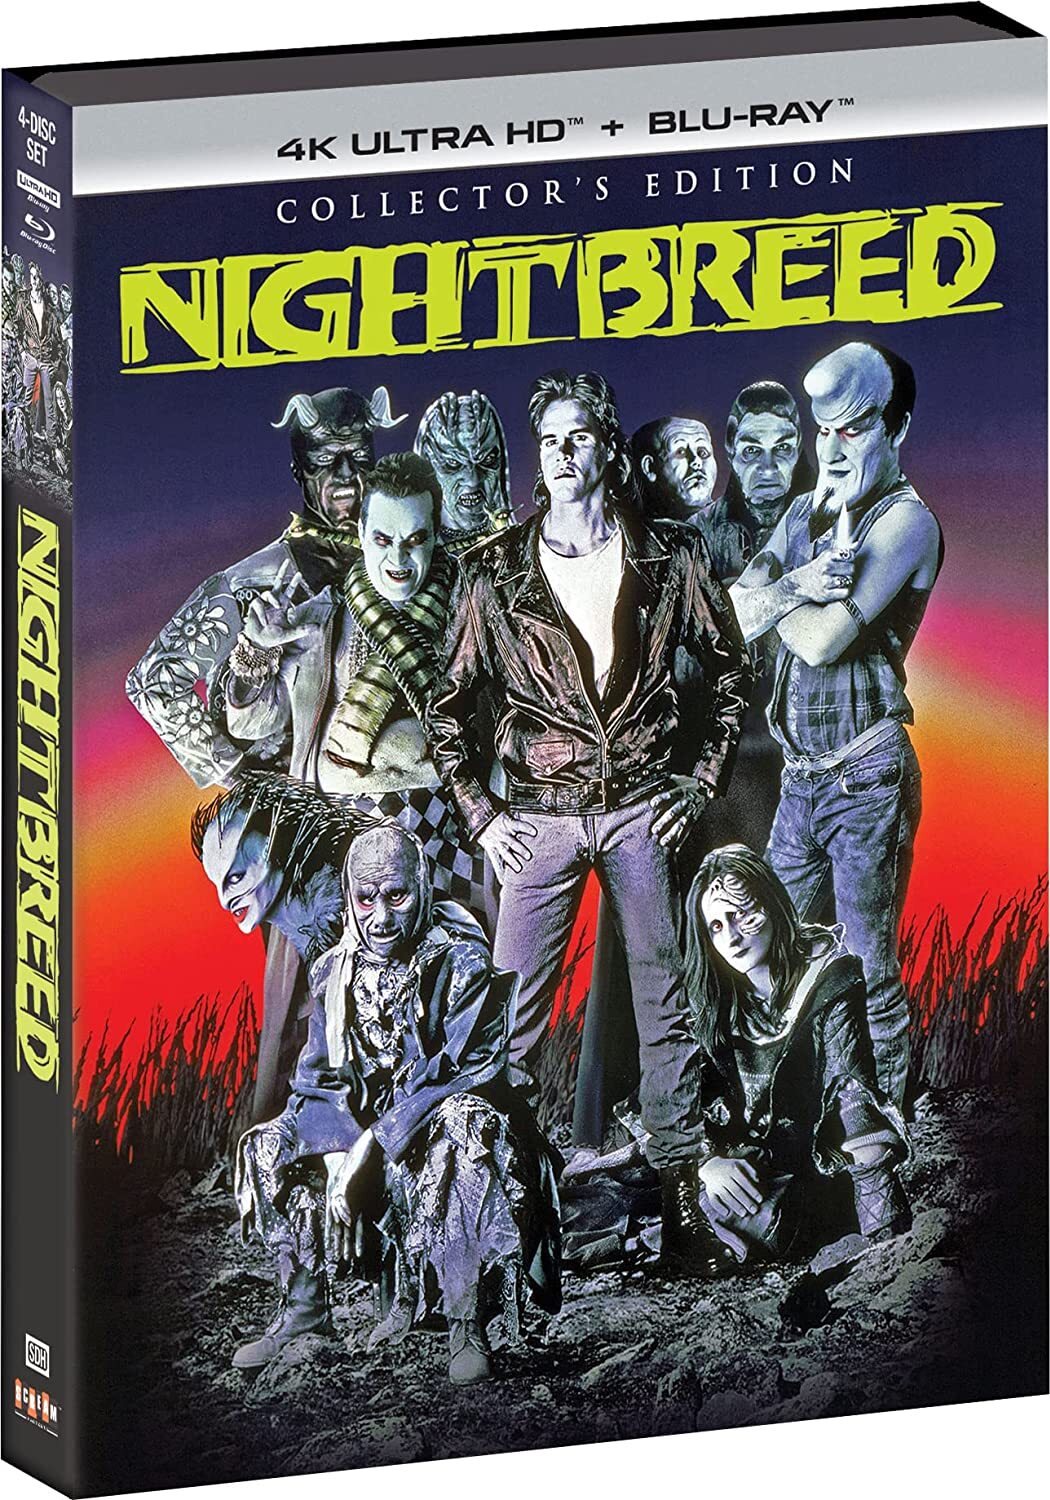 Nightbreed 4K: Collector's Edition w/ Exclusive Slip Cover & Posters (Exclusive)